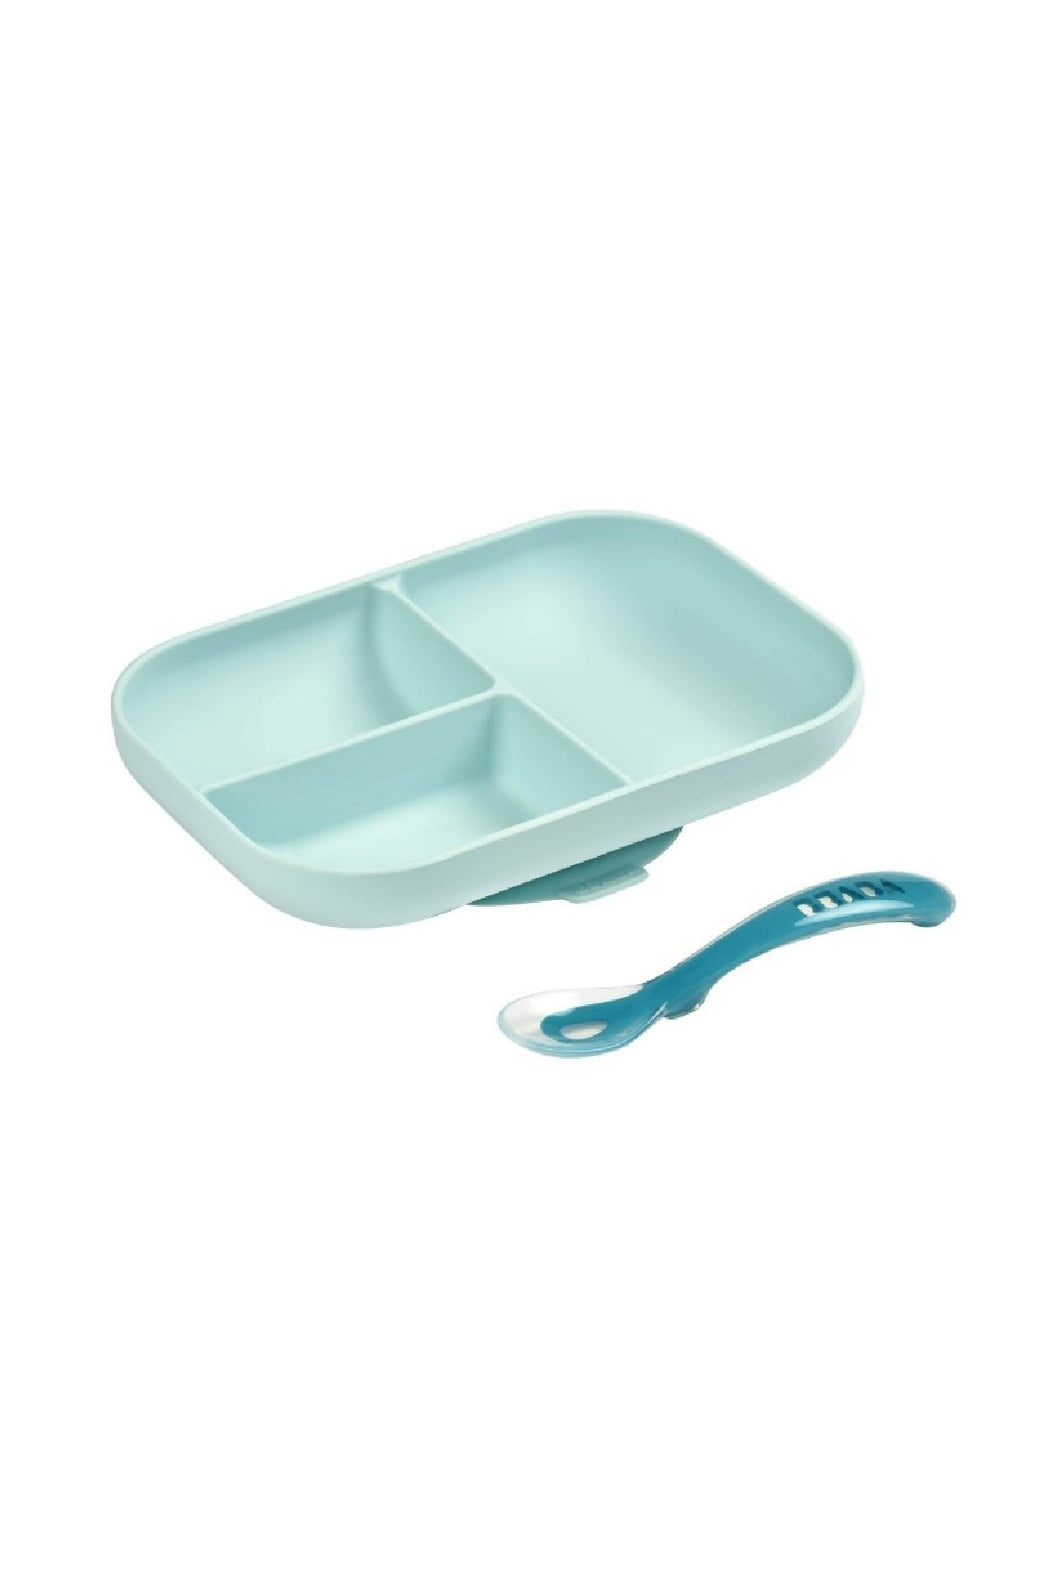 Beaba Silicone Suction Divided Plate 2Nd Age Spoon Blue 1